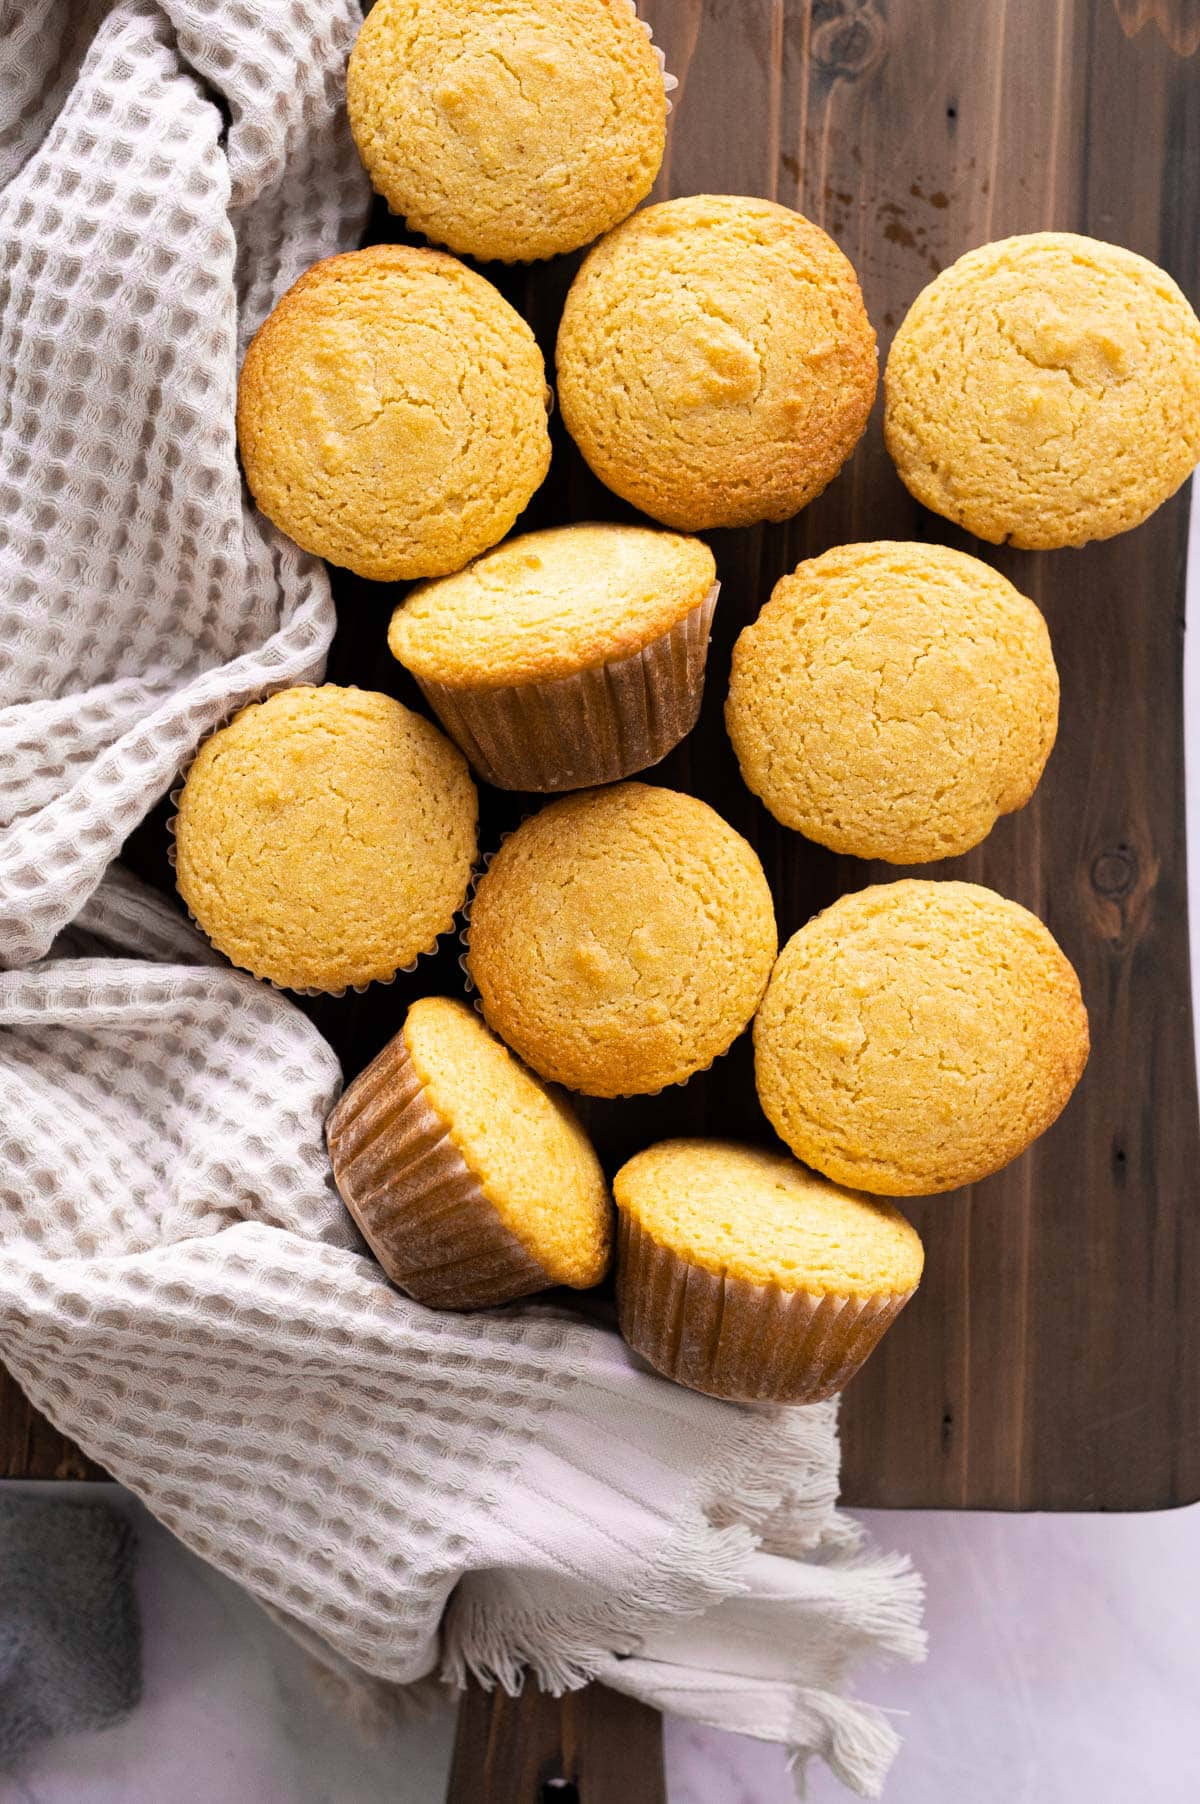 Healthy cornbread muffins on a wooden board and with linen towel.